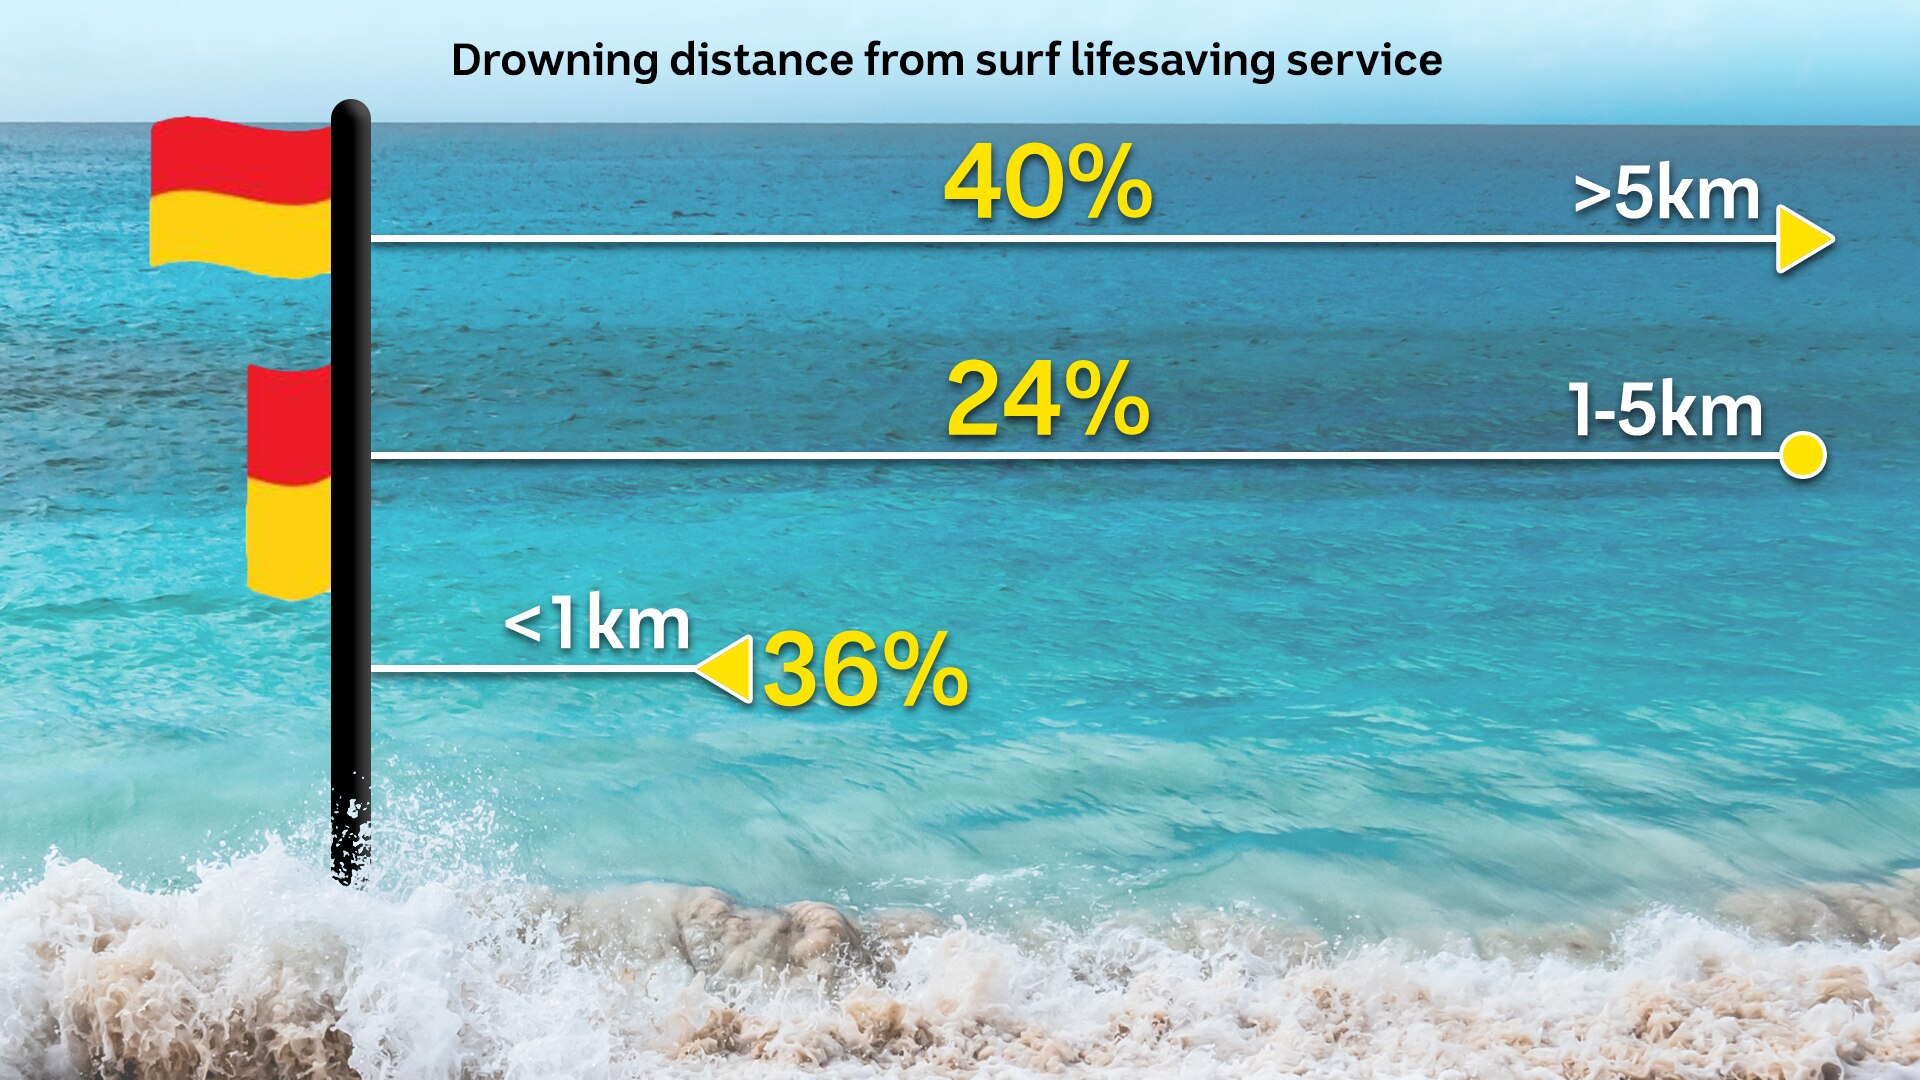 a graph showing how far away drowning deaths were from coastal lifesaving services.